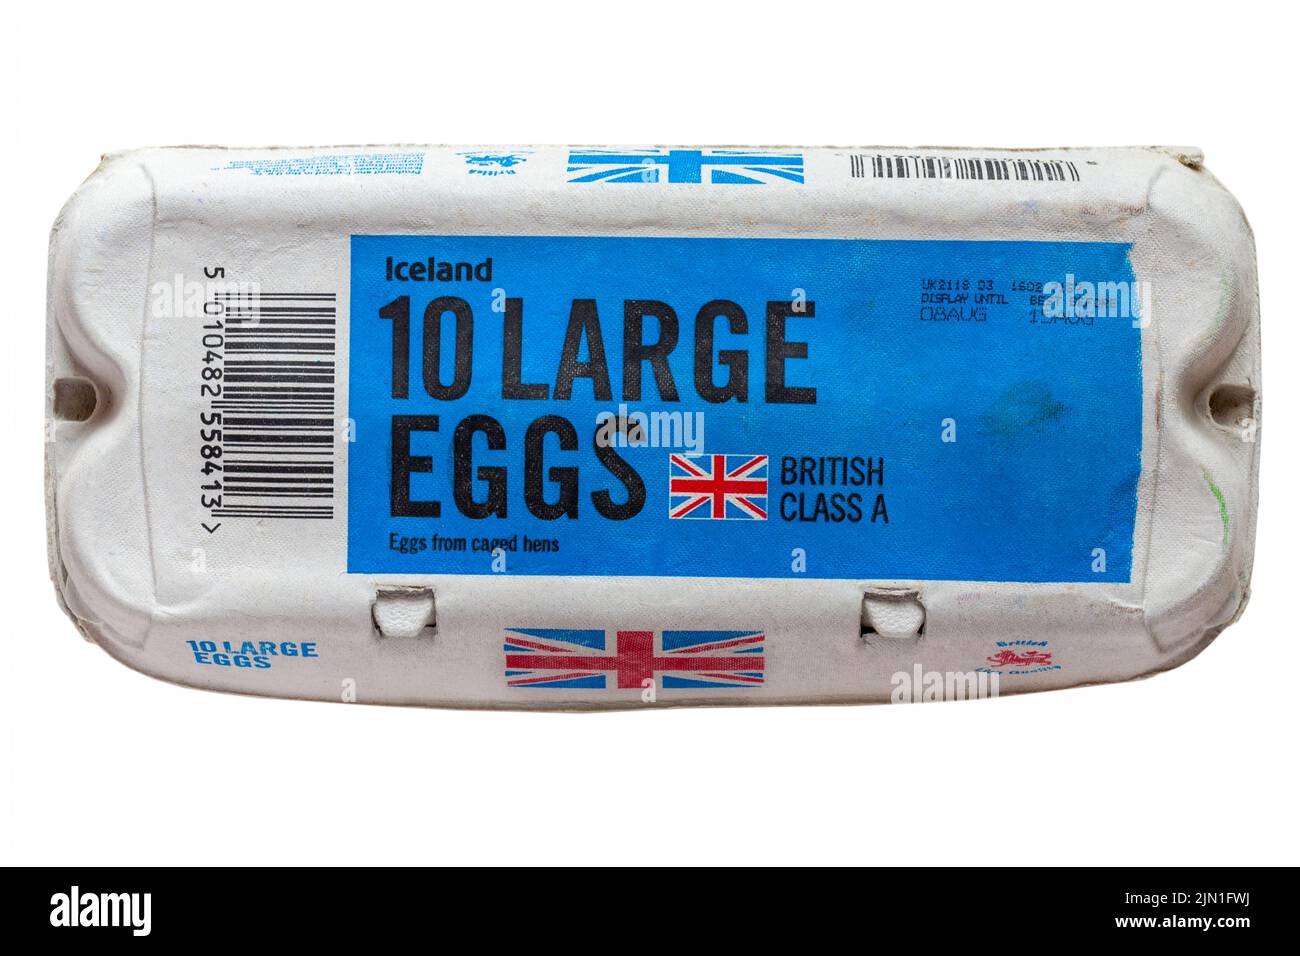 10 large eggs from Iceland shop British Class A eggs from caged hens isolated on white background Stock Photo